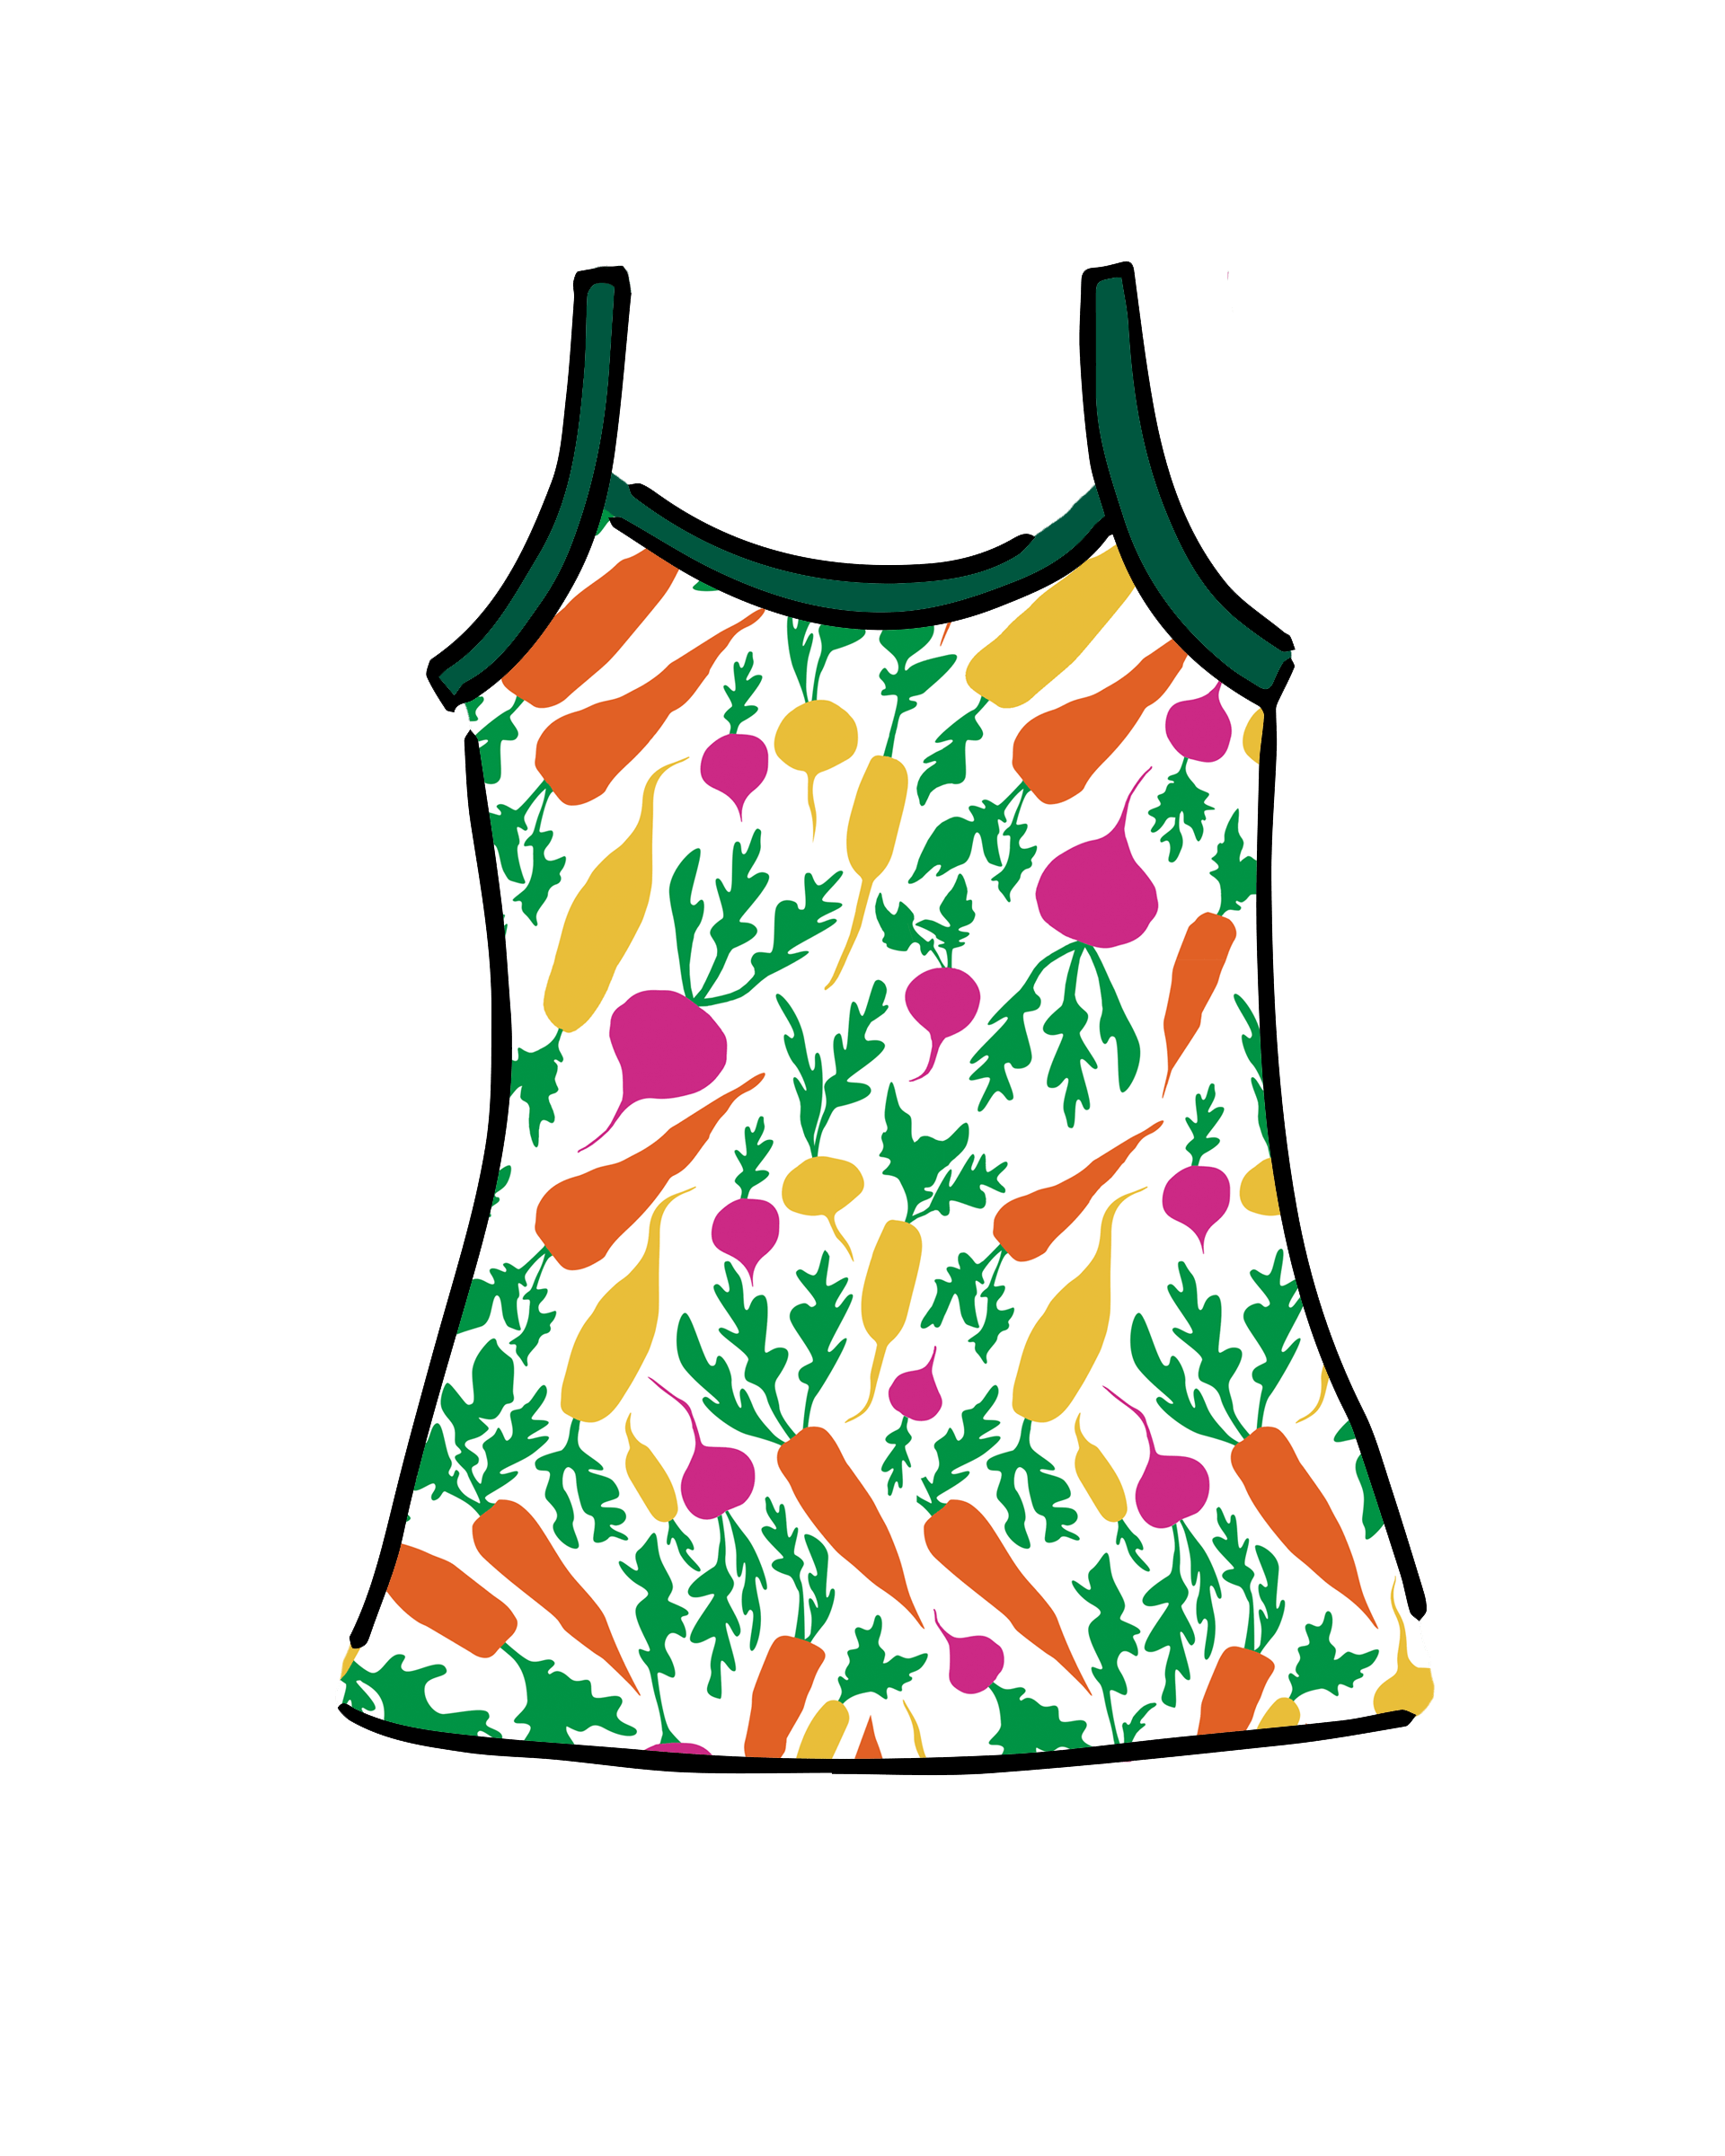 Drawing of Thunderpants Camisole in Root Veggies print.